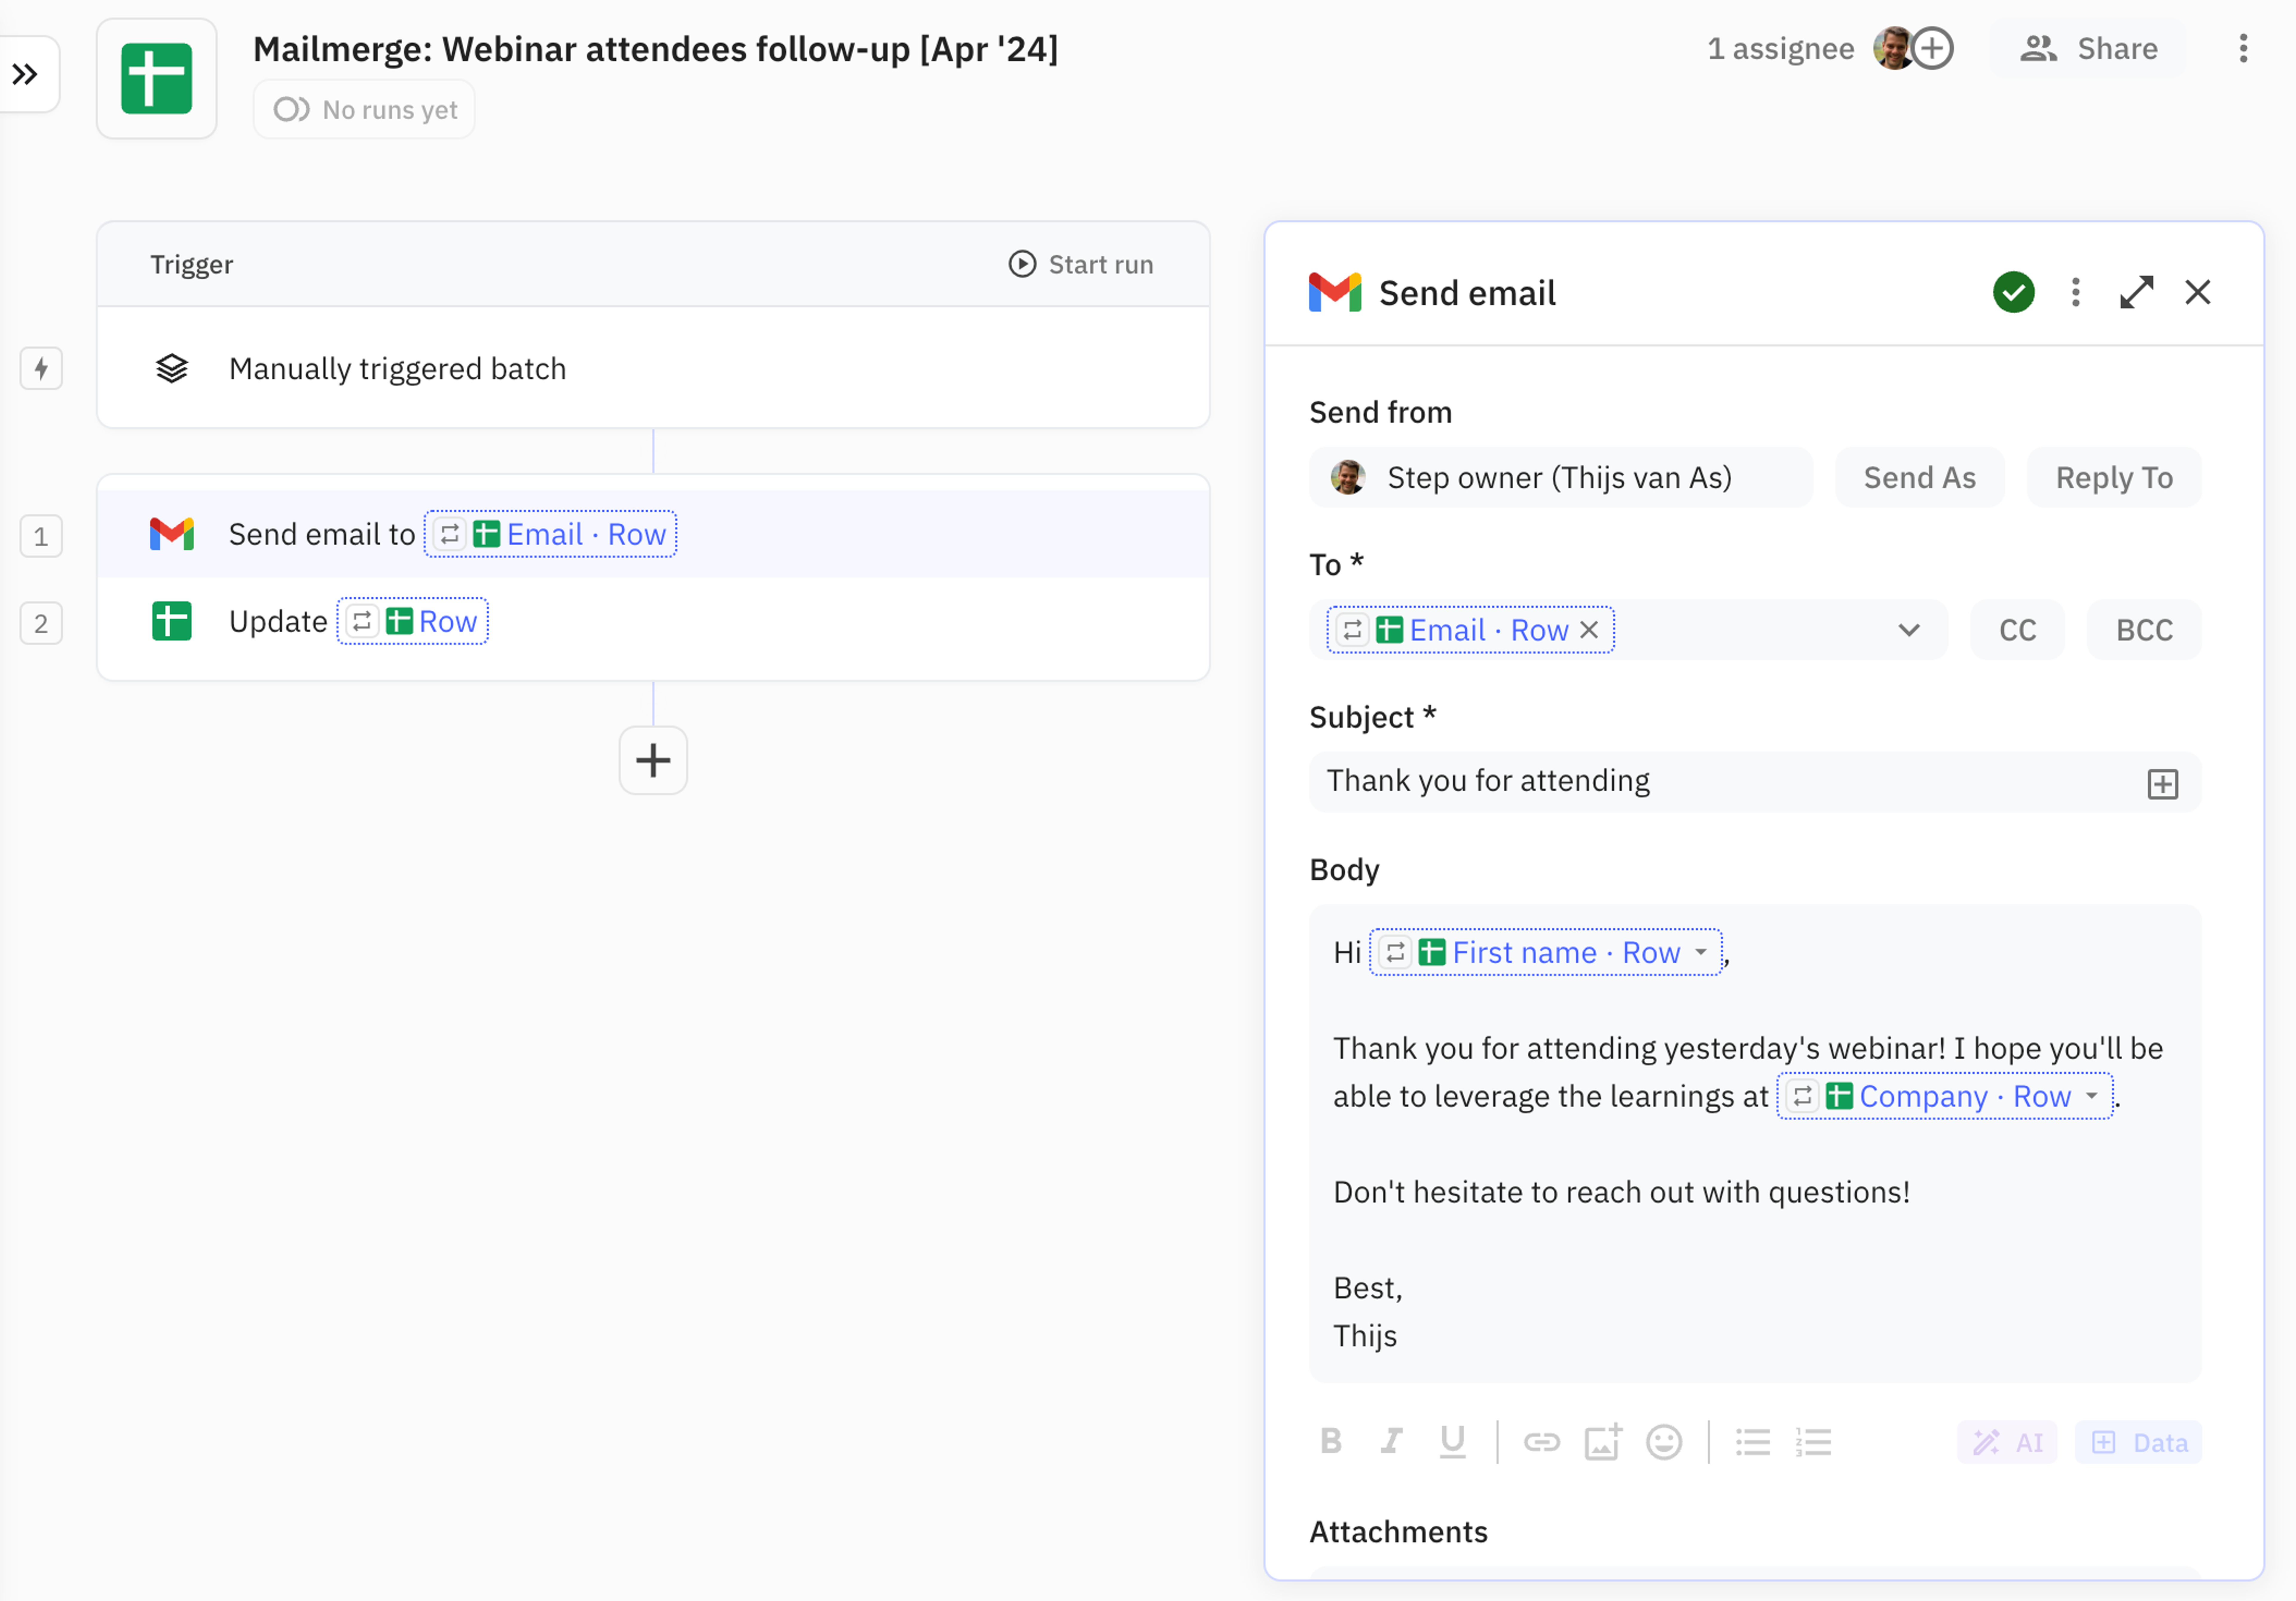 Configure a Gmail - Send email step using the templated values from the mail merge spreadsheet